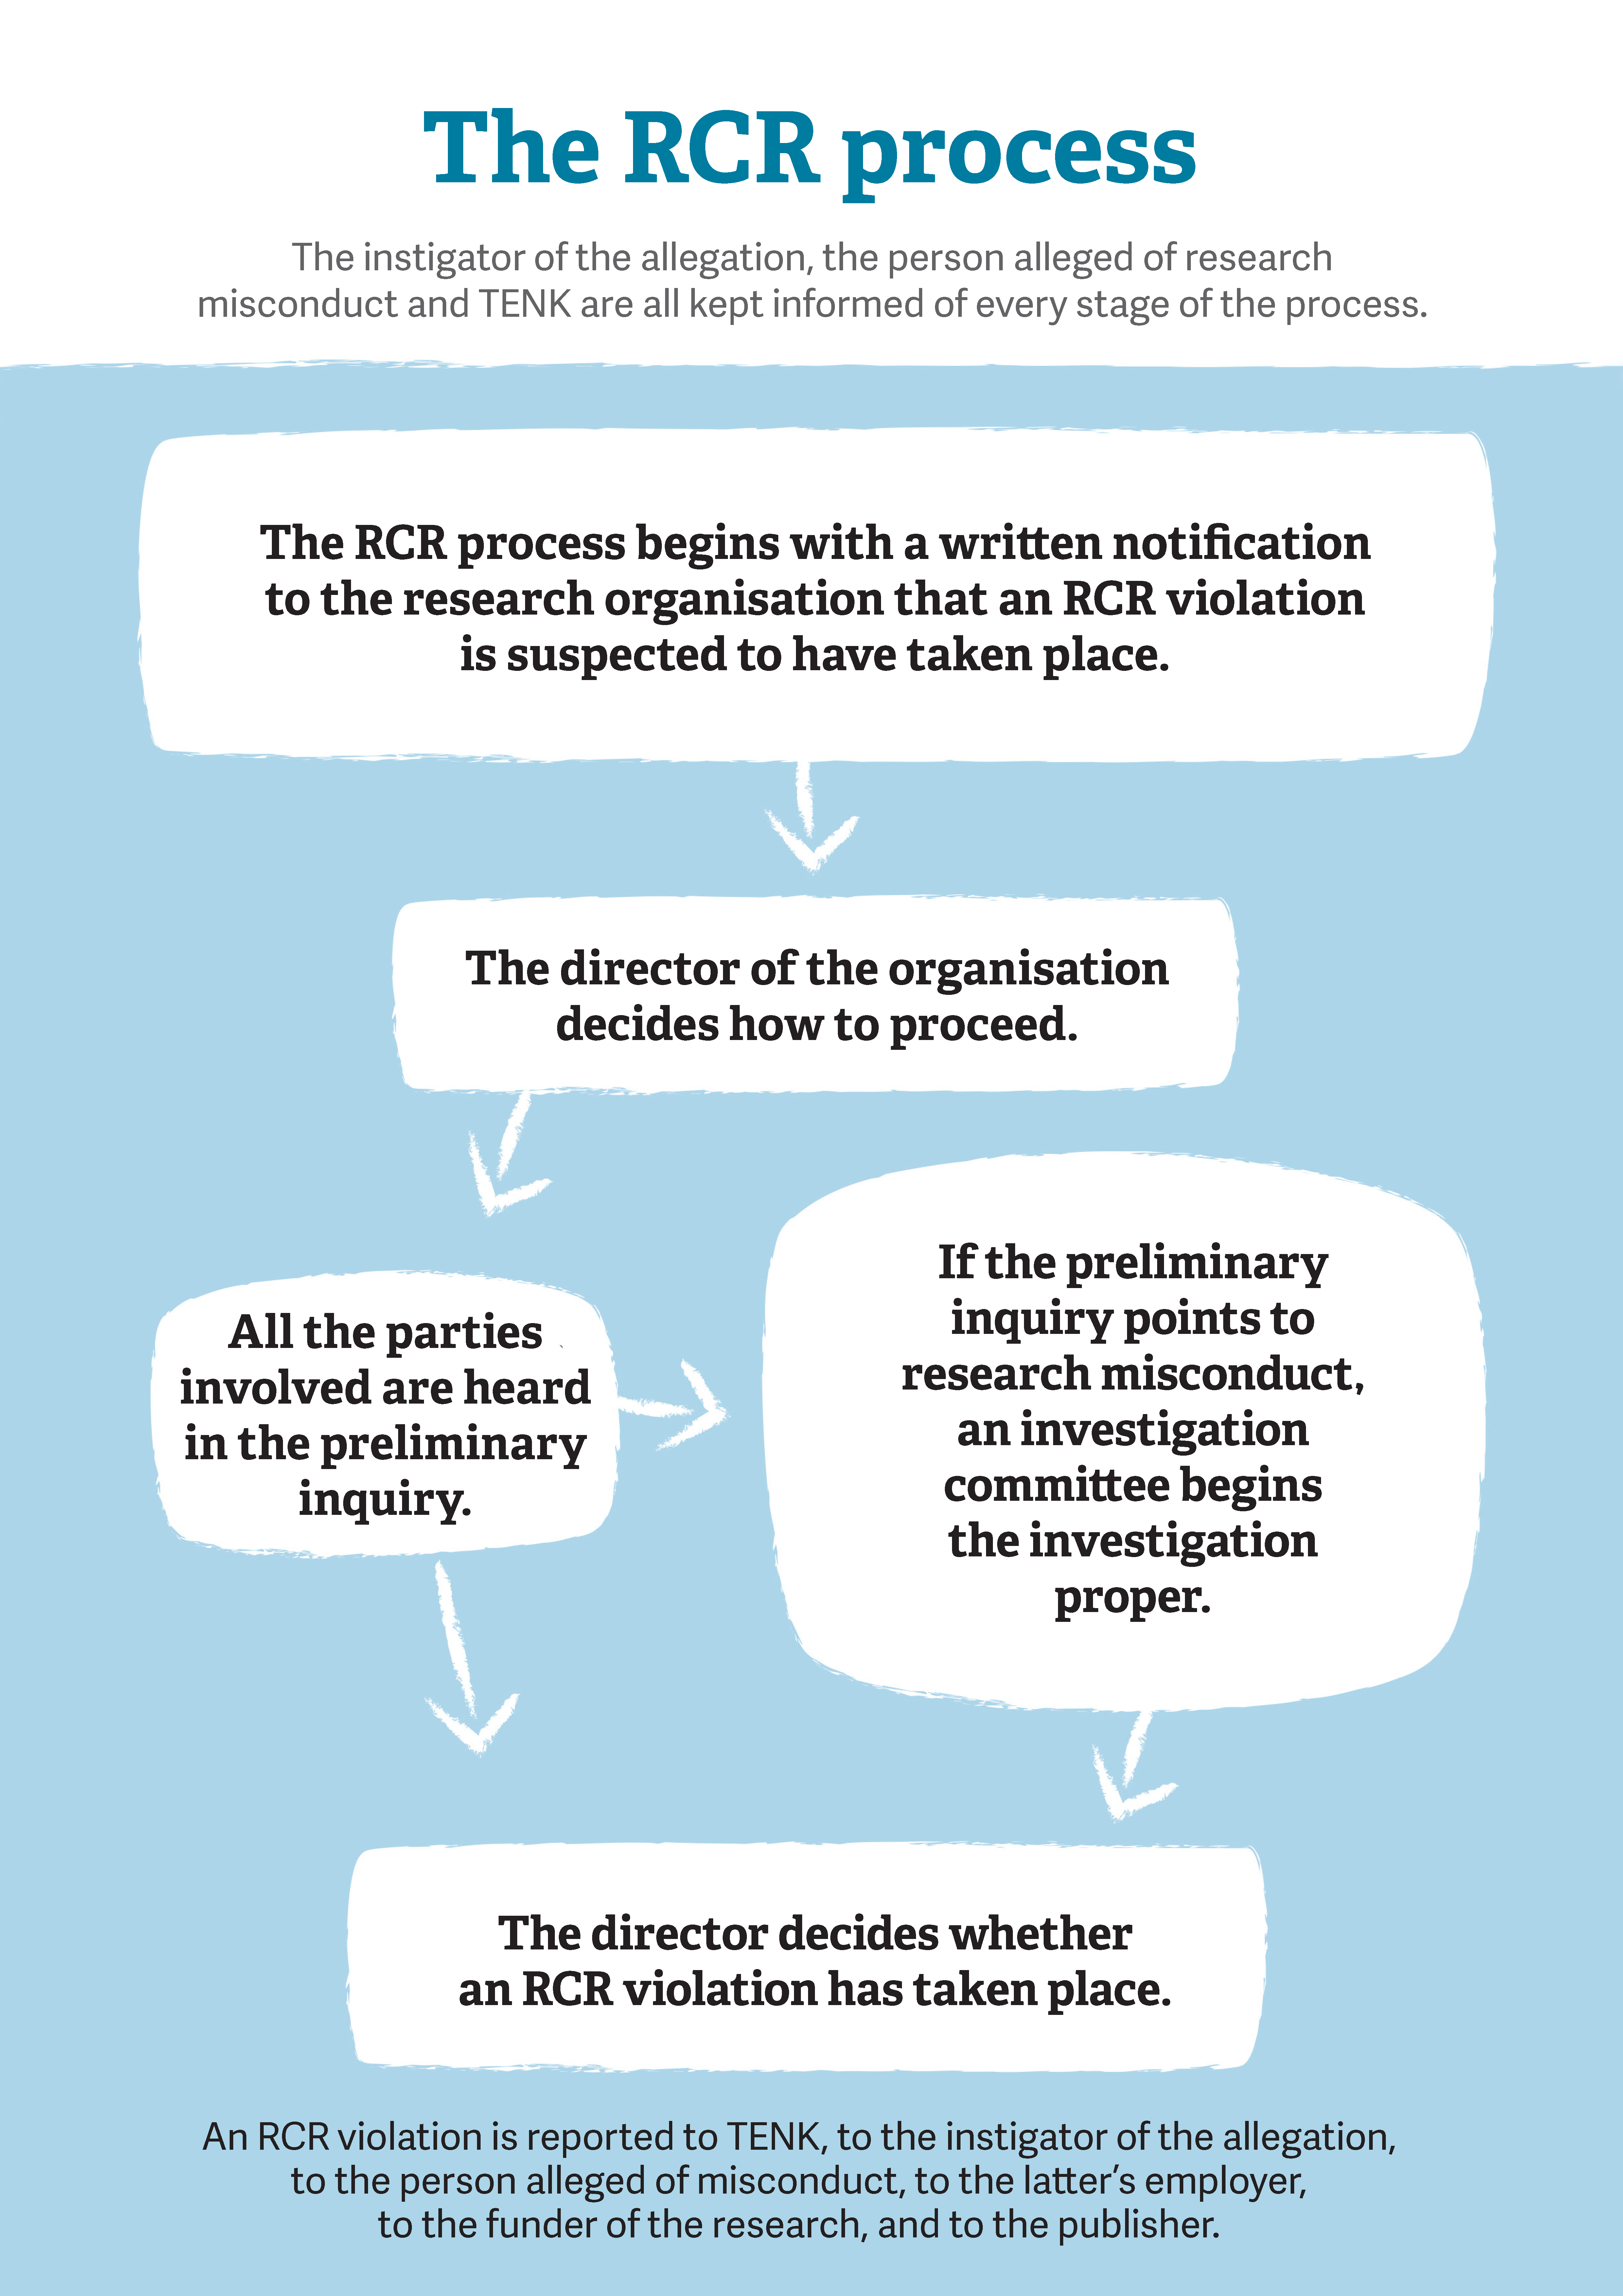 A shortened version of the RCR process described in the text